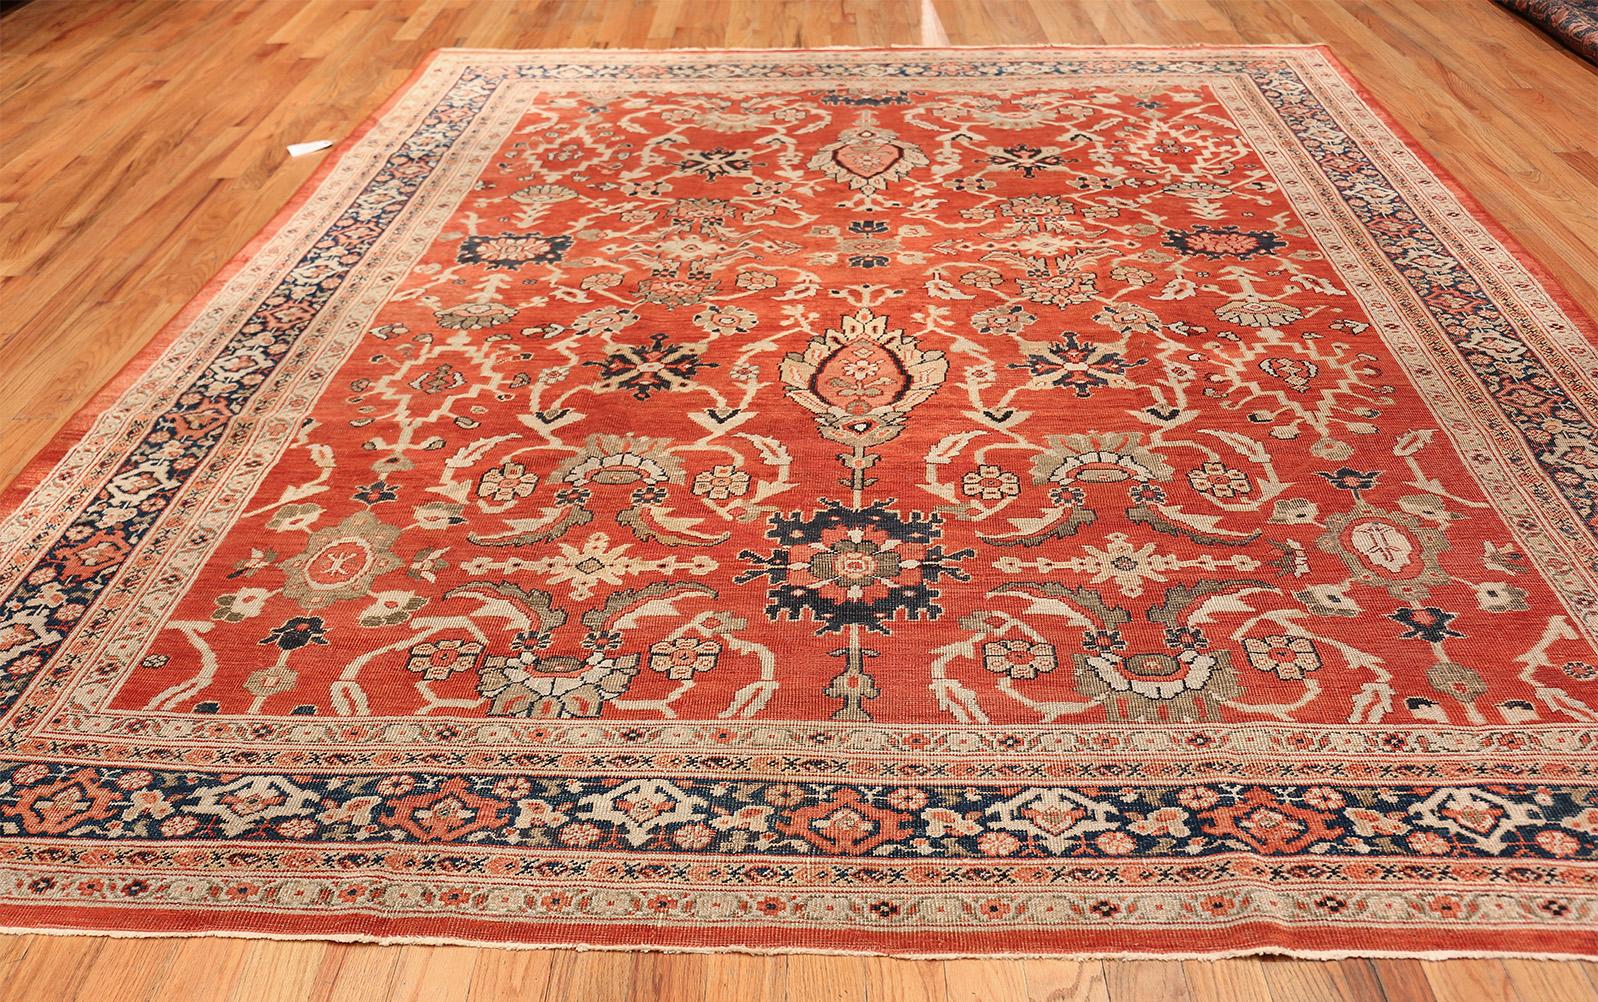 Magnificent And Luminous Rusty Red Background Square Antique Persian Sultanabad Rug, Country of Origin / Rug Type: Persian Rug, Circa Date: 1900 – A luminous rusty red background creates a spectacular background that displays the floral and